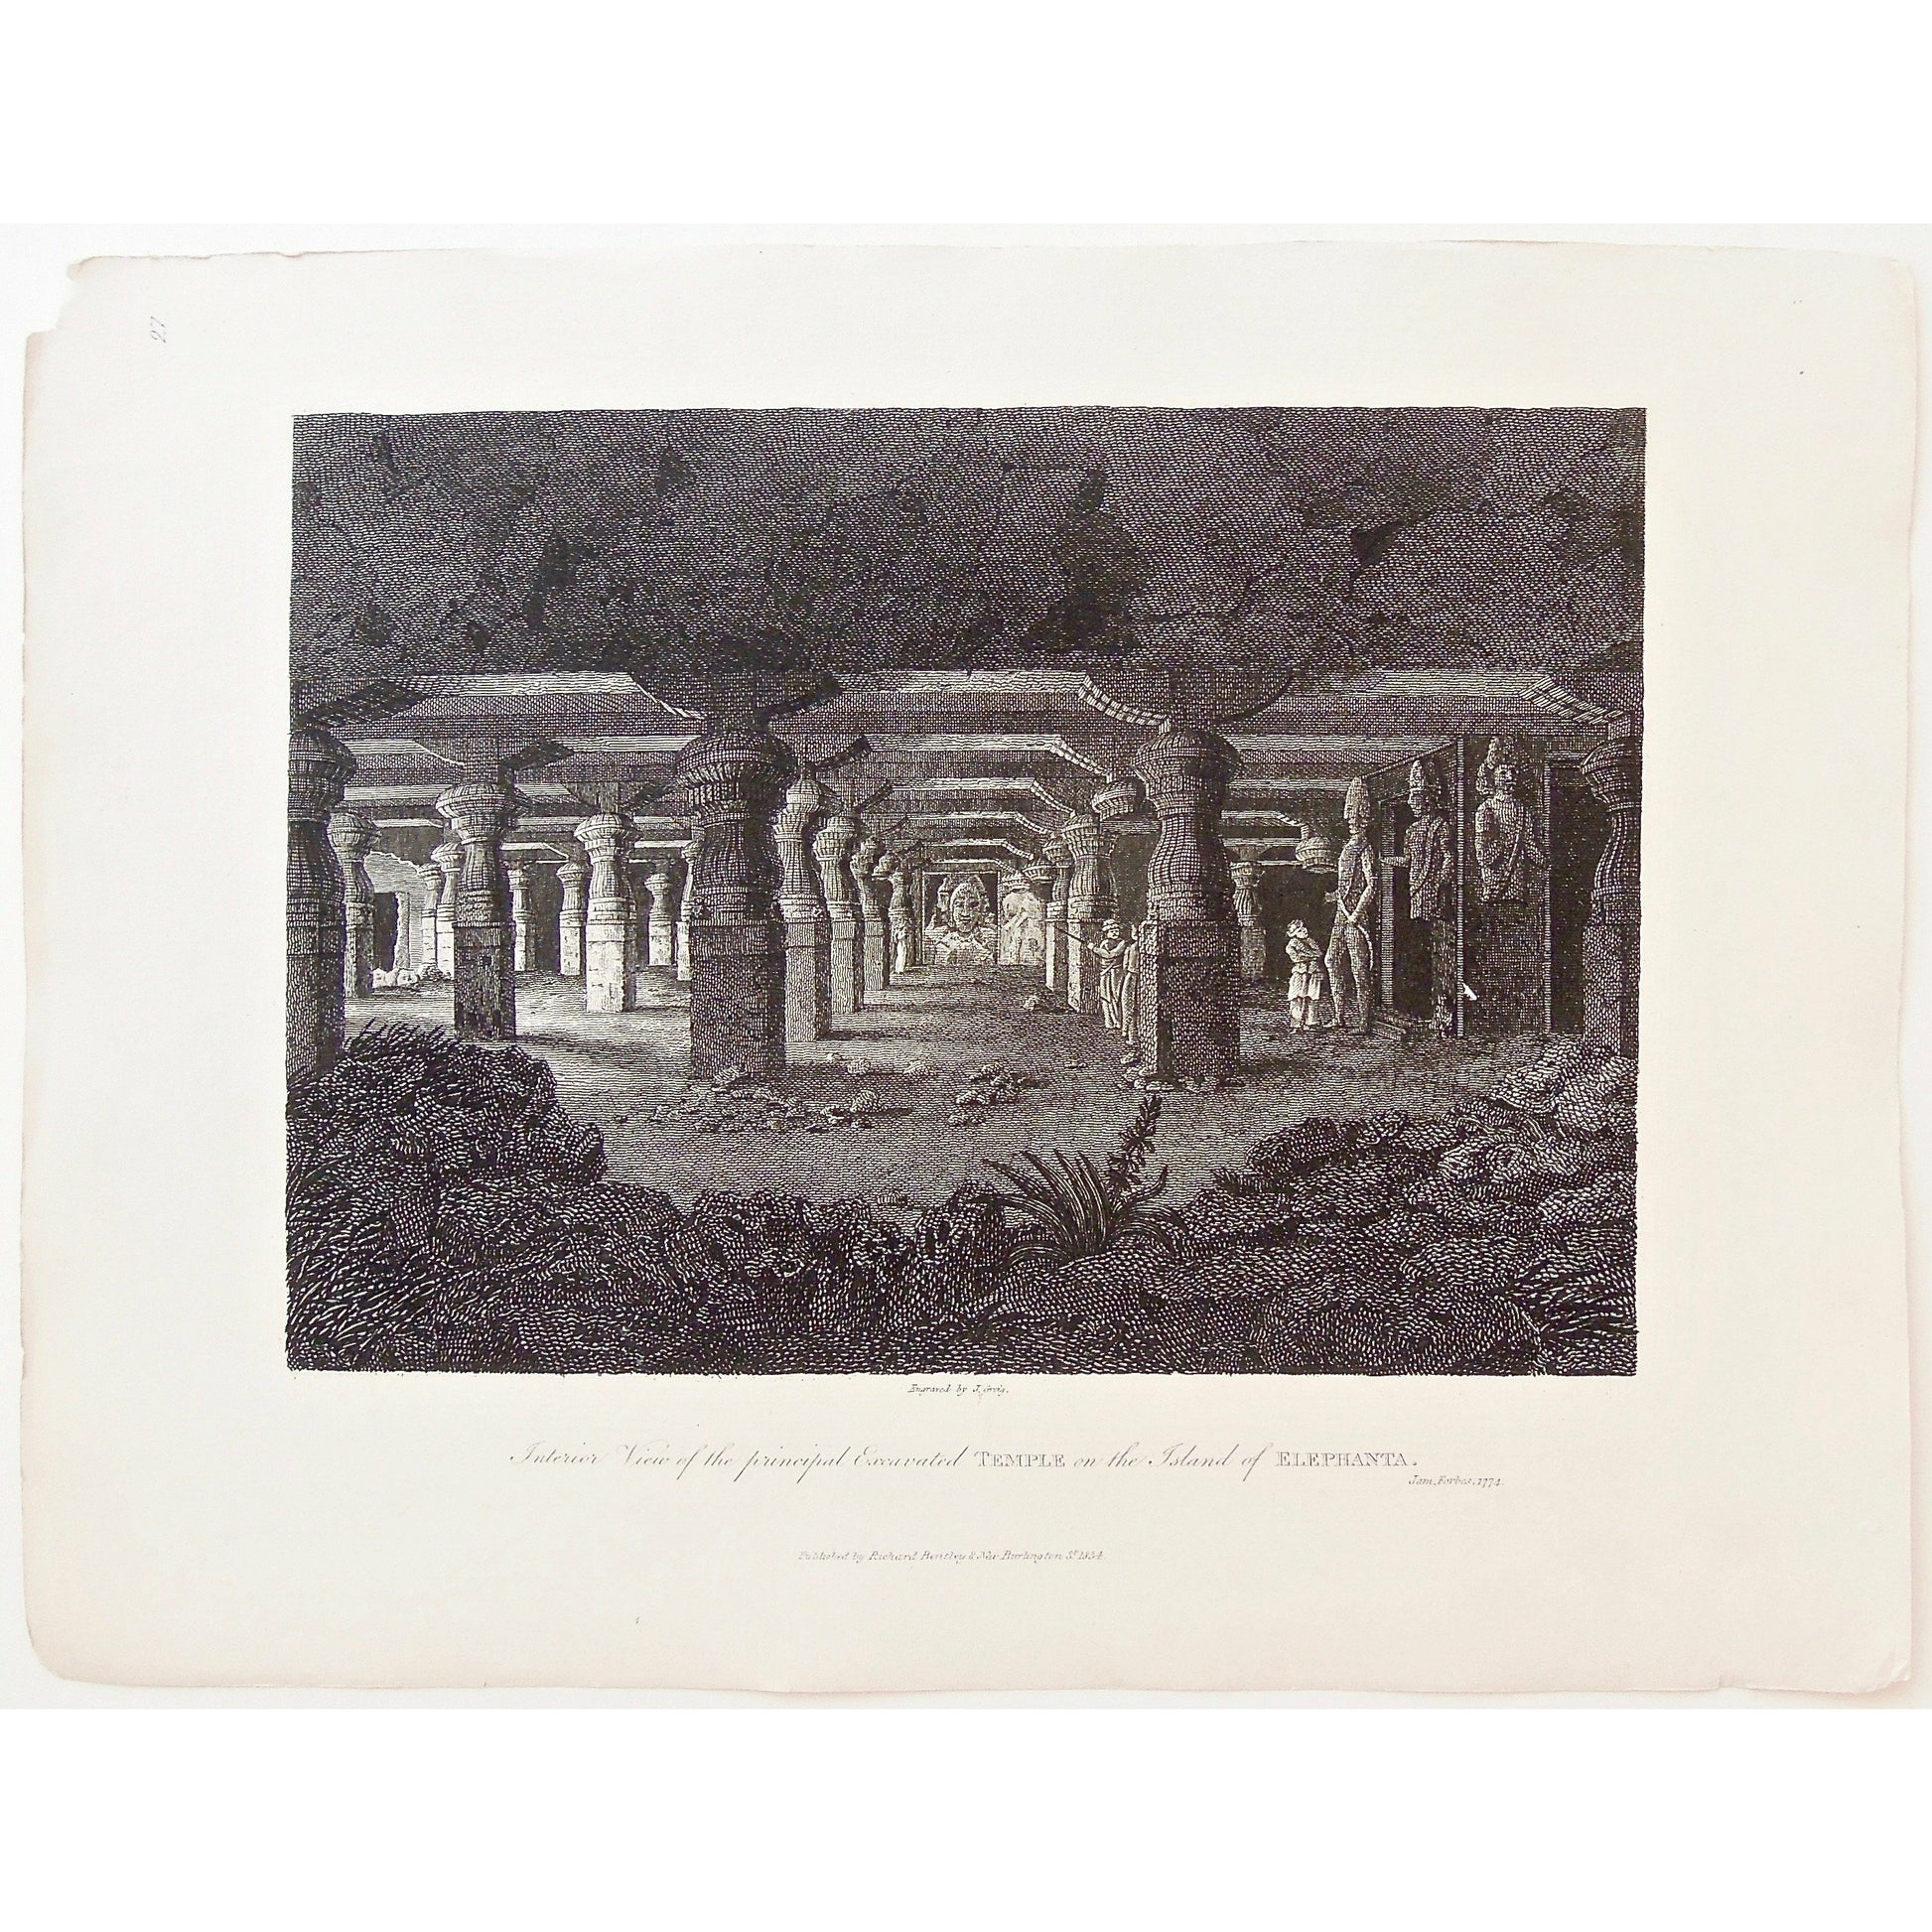 Interior View, Principal Excavated Temple, Excavated Temple, Temple, Temple on the Island of Elephanta, Island of Elephanta, Elephanta, Island, India, Indian, Indian Temple, Indian architecture, ancient architecture, Indian gods, Gods, sculptures, religious art, religious sculptures, pillars, temple pillars, James Forbes, Forbes, Eliza Rosée, Countess De Montalembert, Oriental Memoirs, Narrative of Seventeen Years Residence in India, Bentley, 8 New Burlington Street, London, Greig, Nichols & Son, 25 Parlia